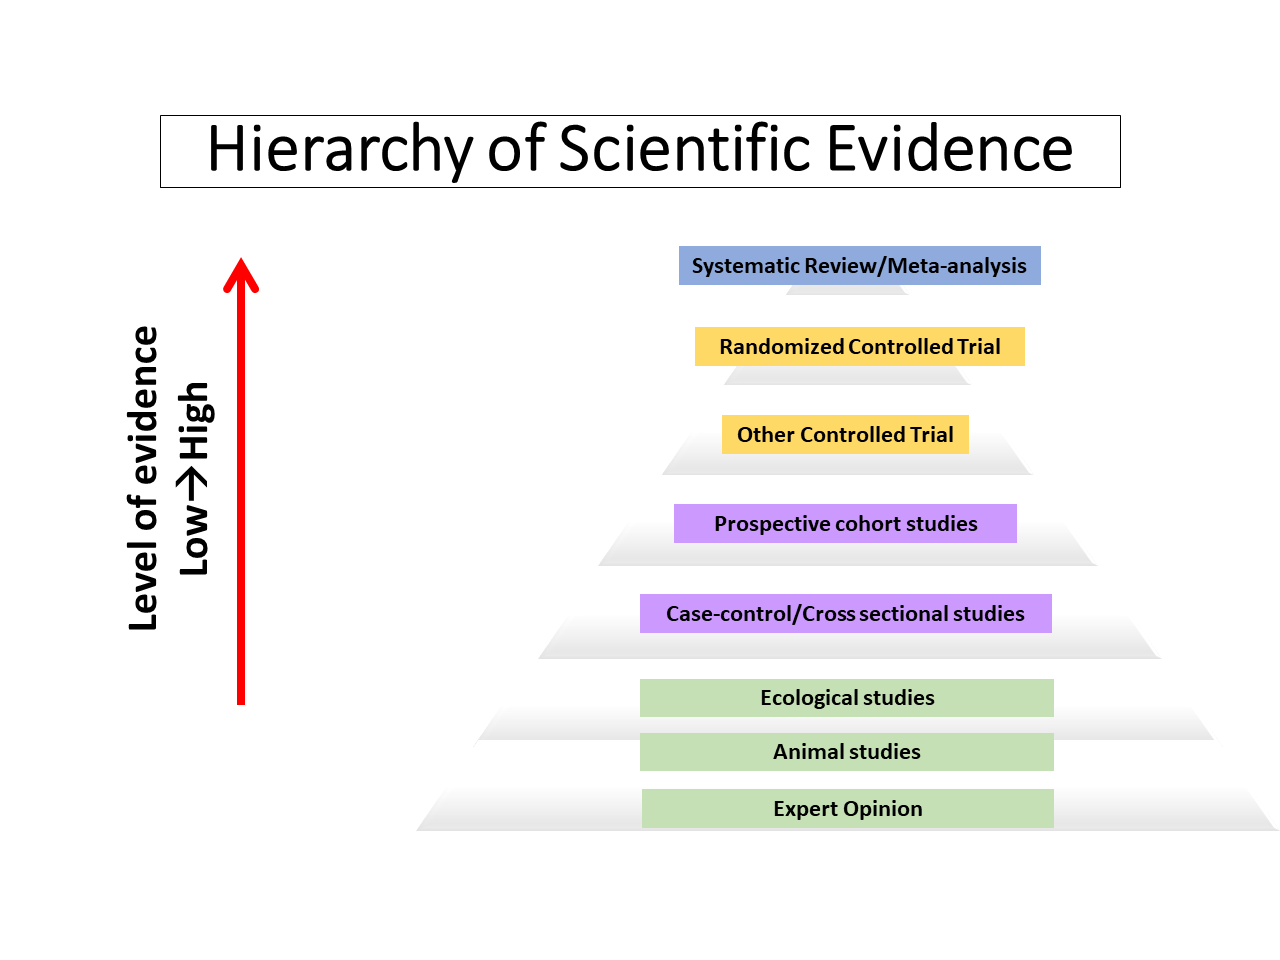 Hierarchy of scientific evidence from lowest to highest quality of evidence